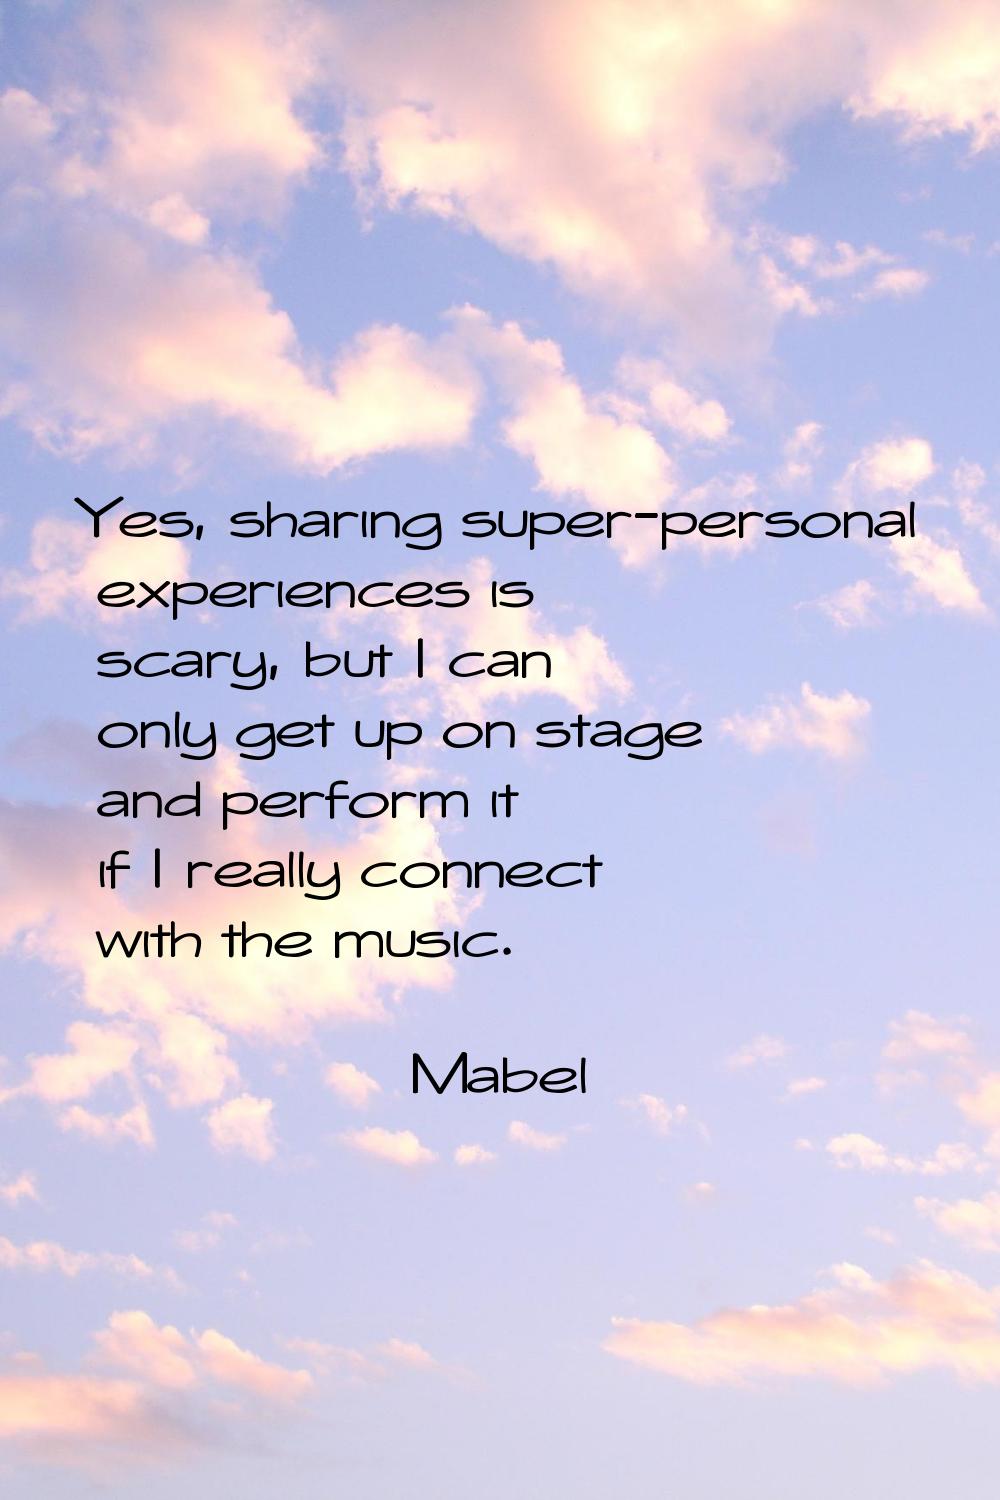 Yes, sharing super-personal experiences is scary, but I can only get up on stage and perform it if 